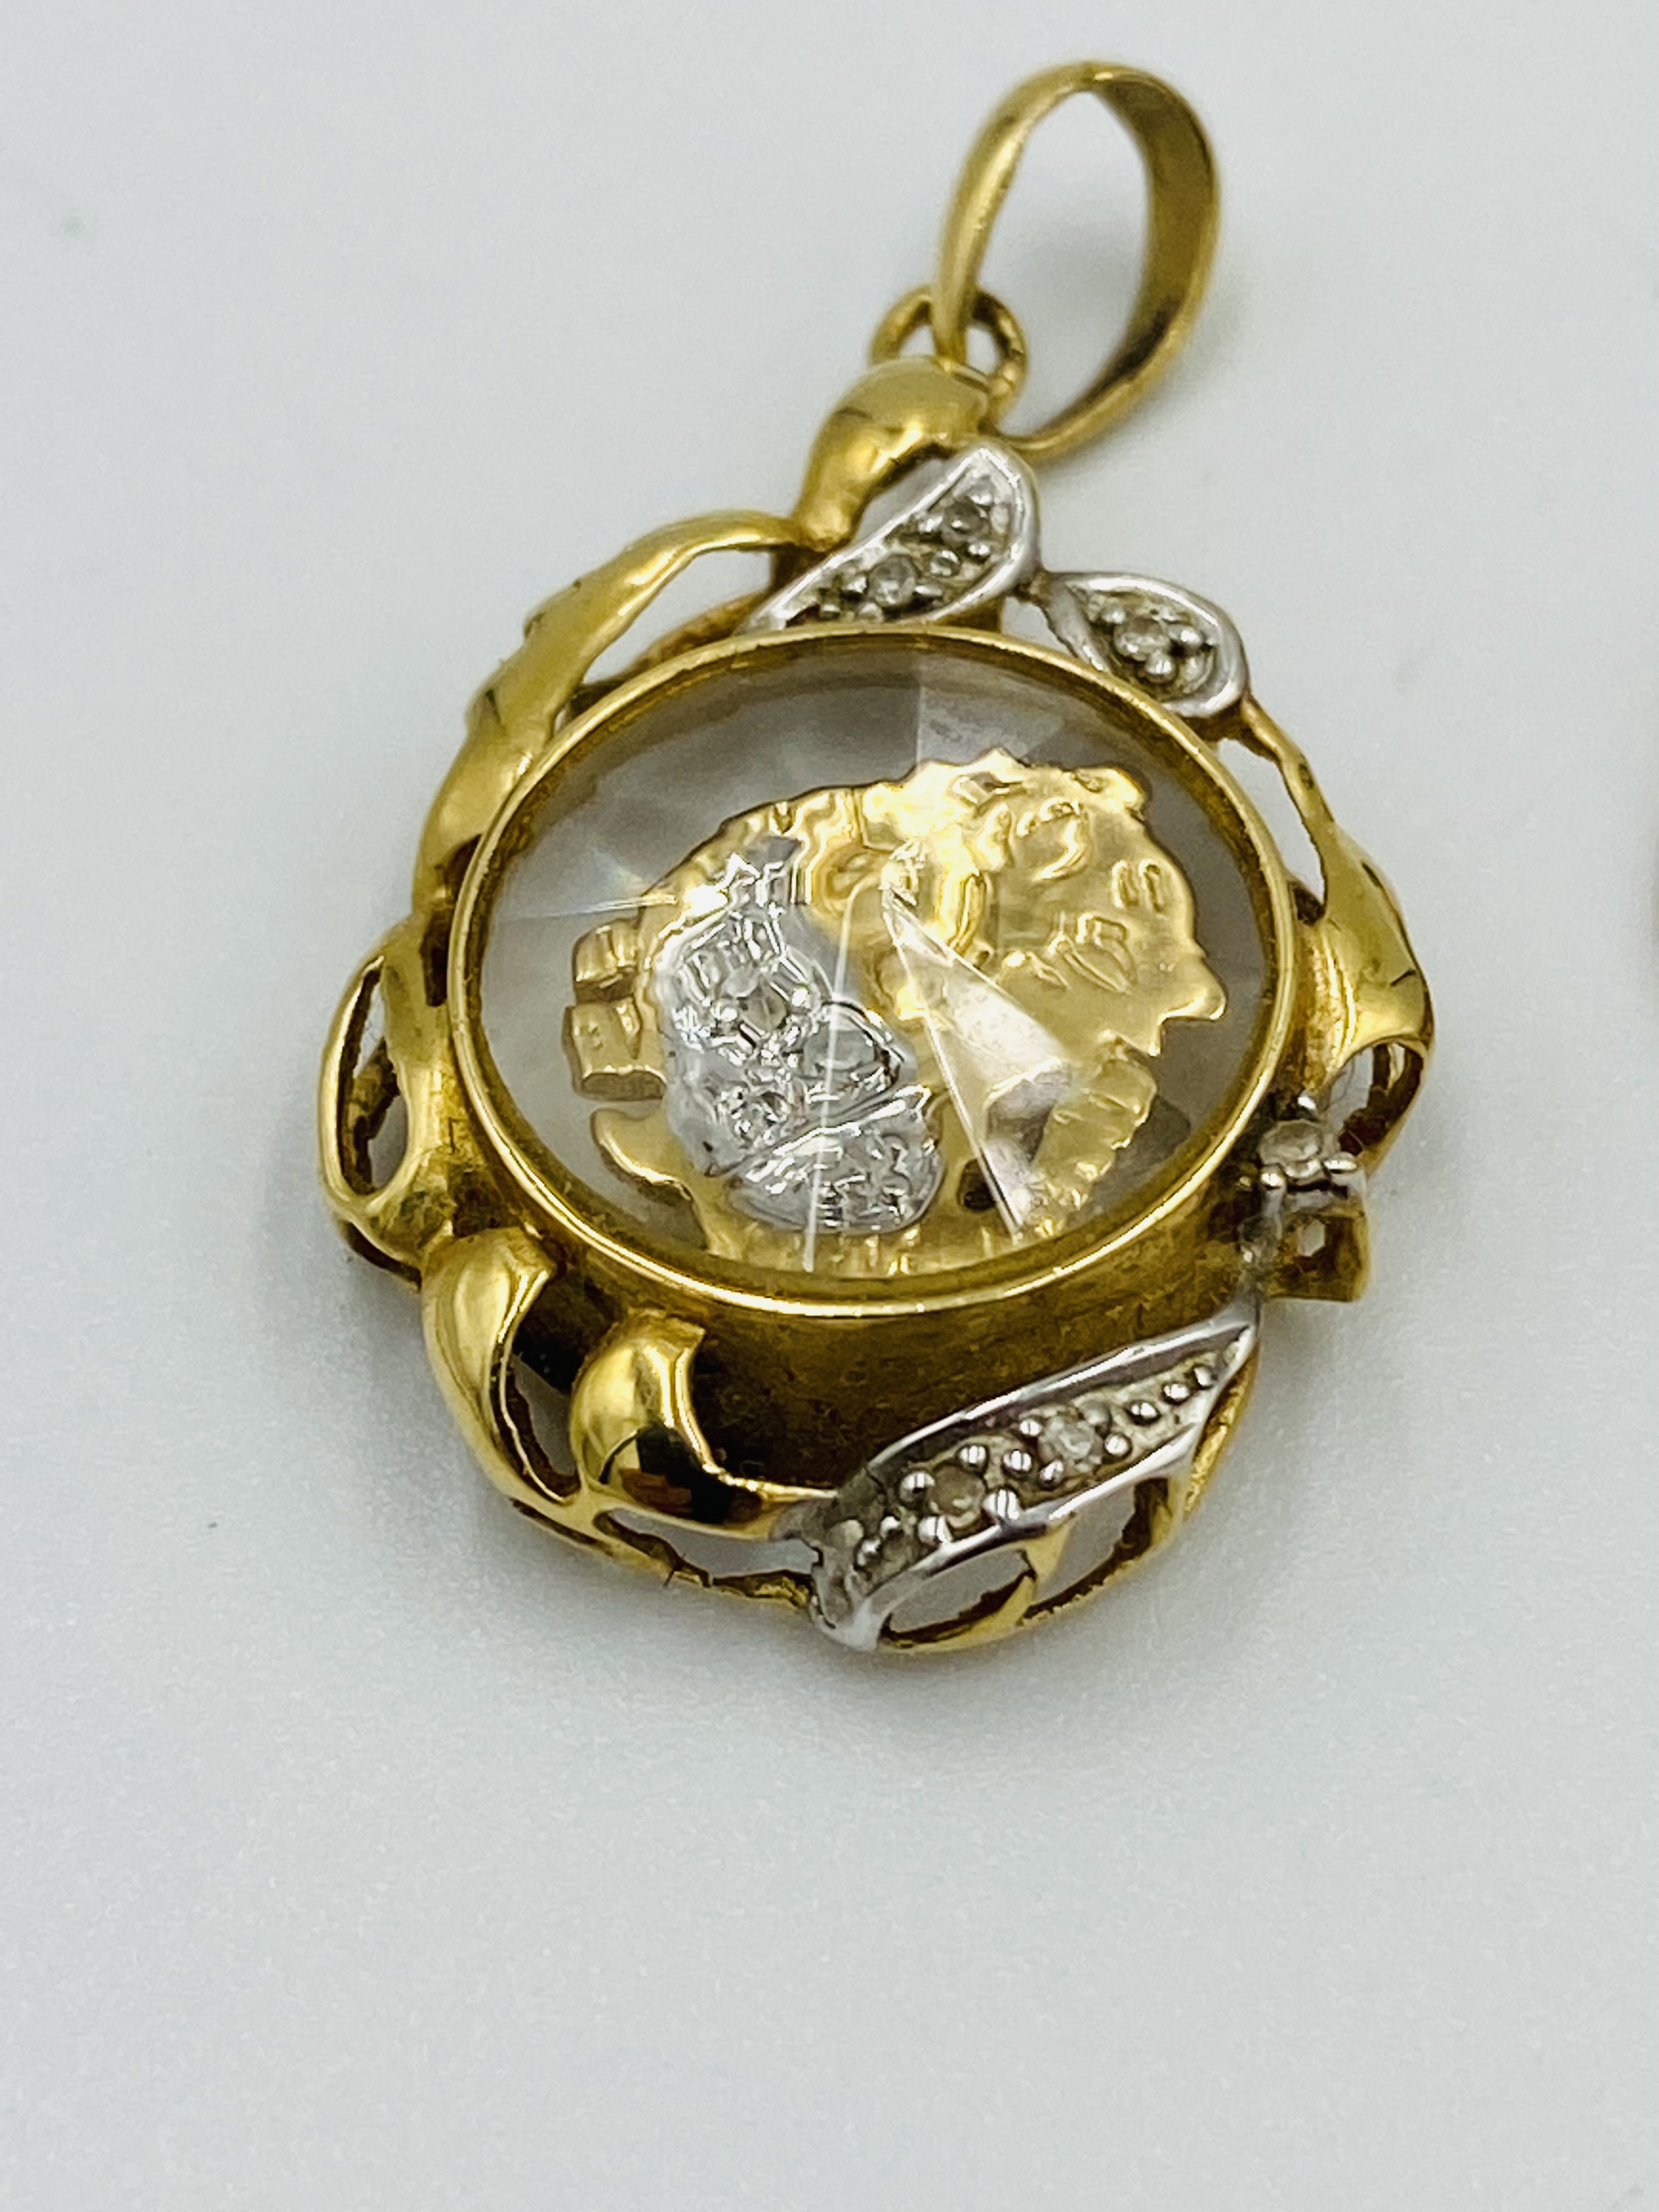 18ct gold and diamond pendant together with two 9ct gold pendants - Image 4 of 6